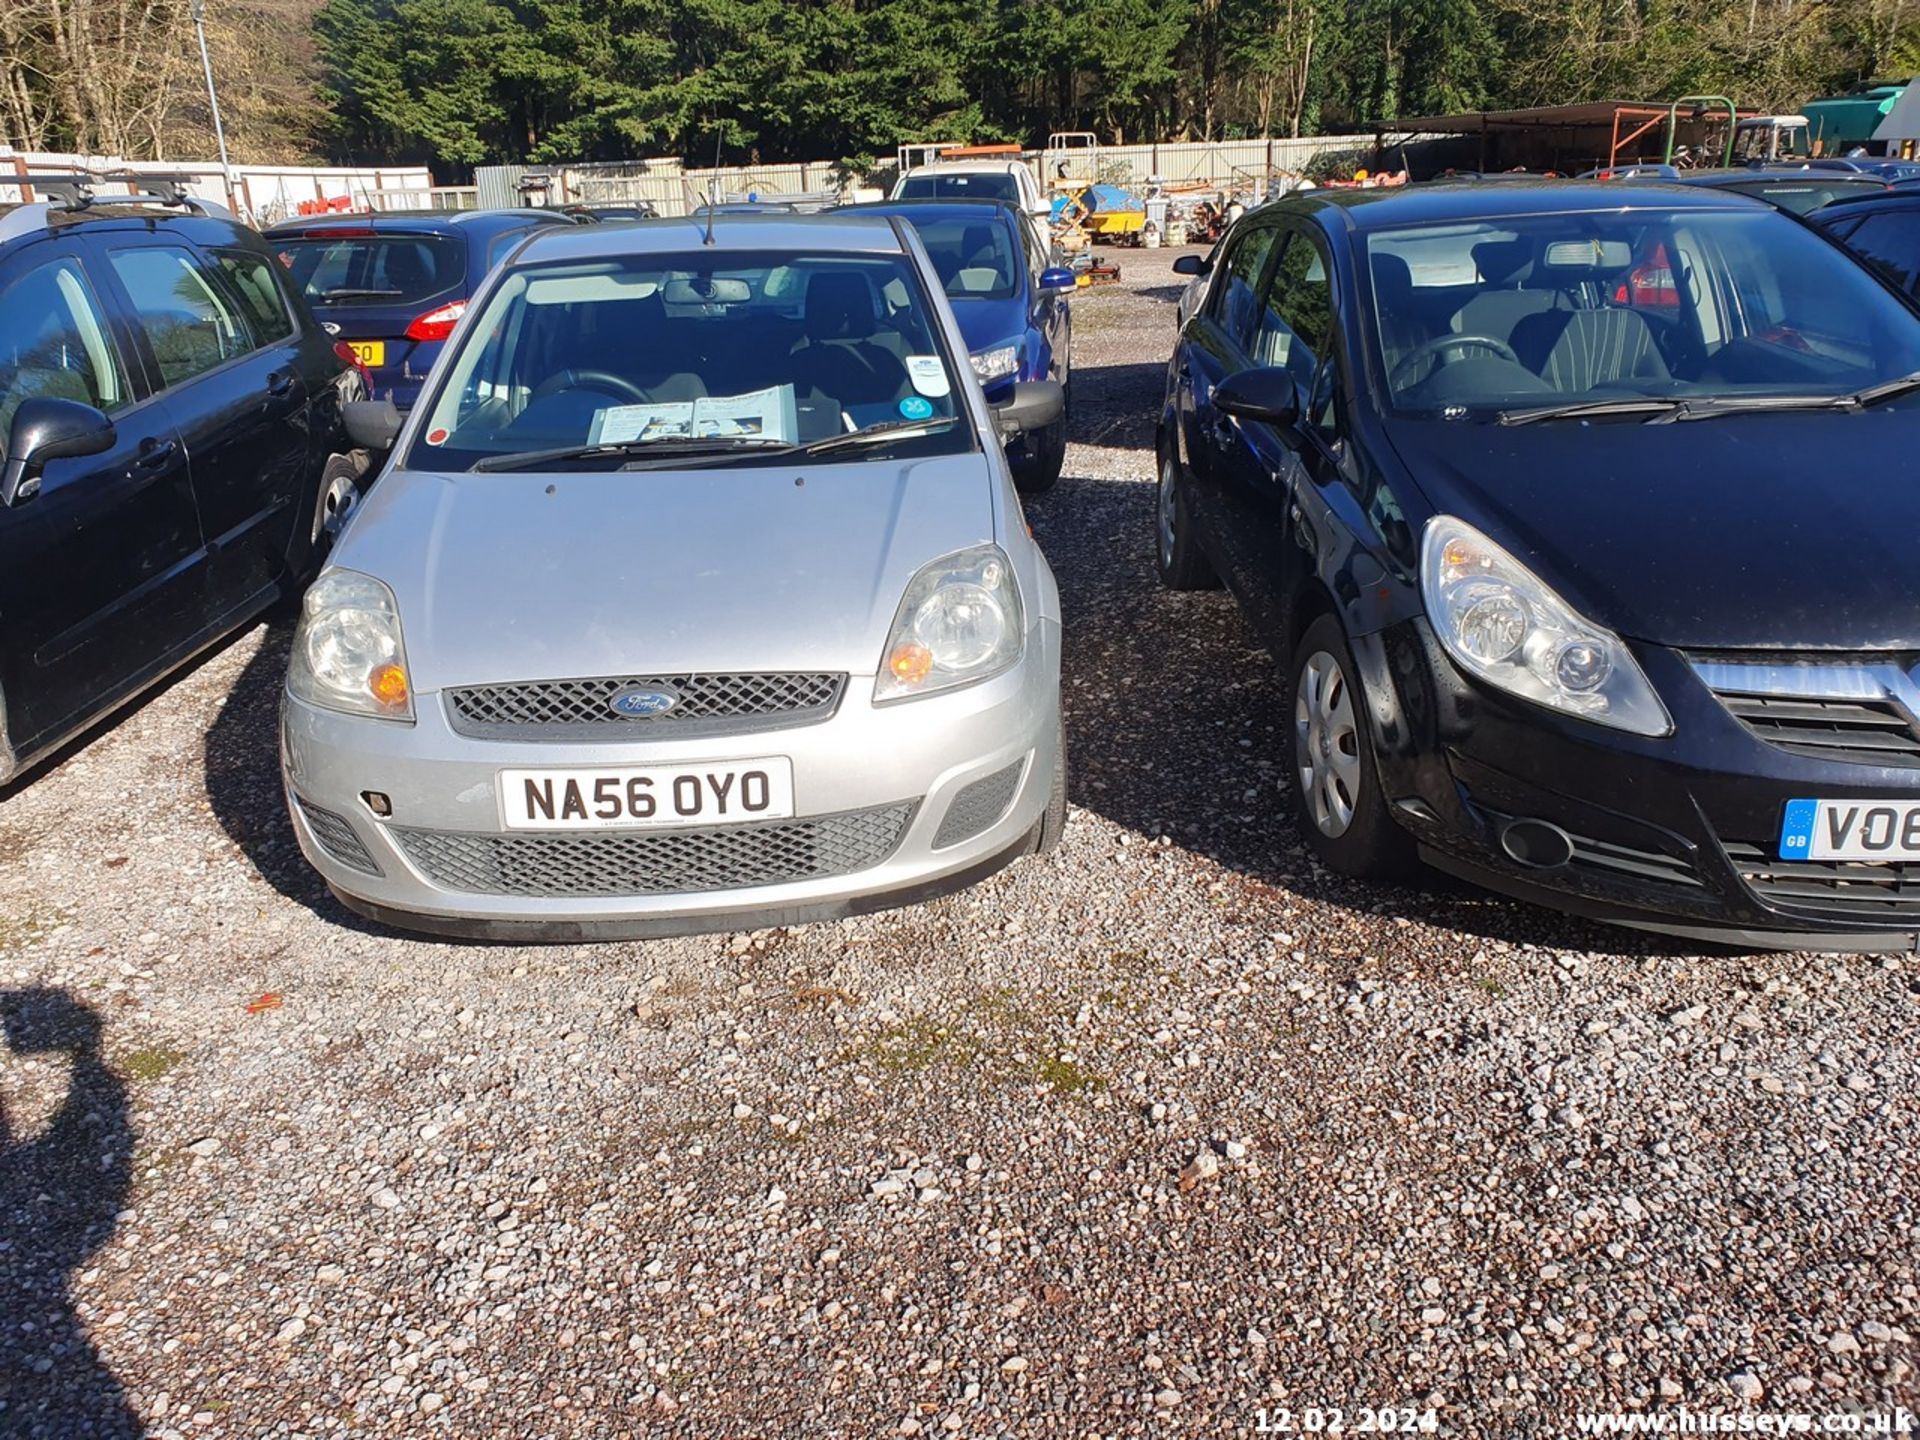 06/56 FORD FIESTA STYLE TDCI - 1399cc 5dr Hatchback (Silver) - Image 23 of 39